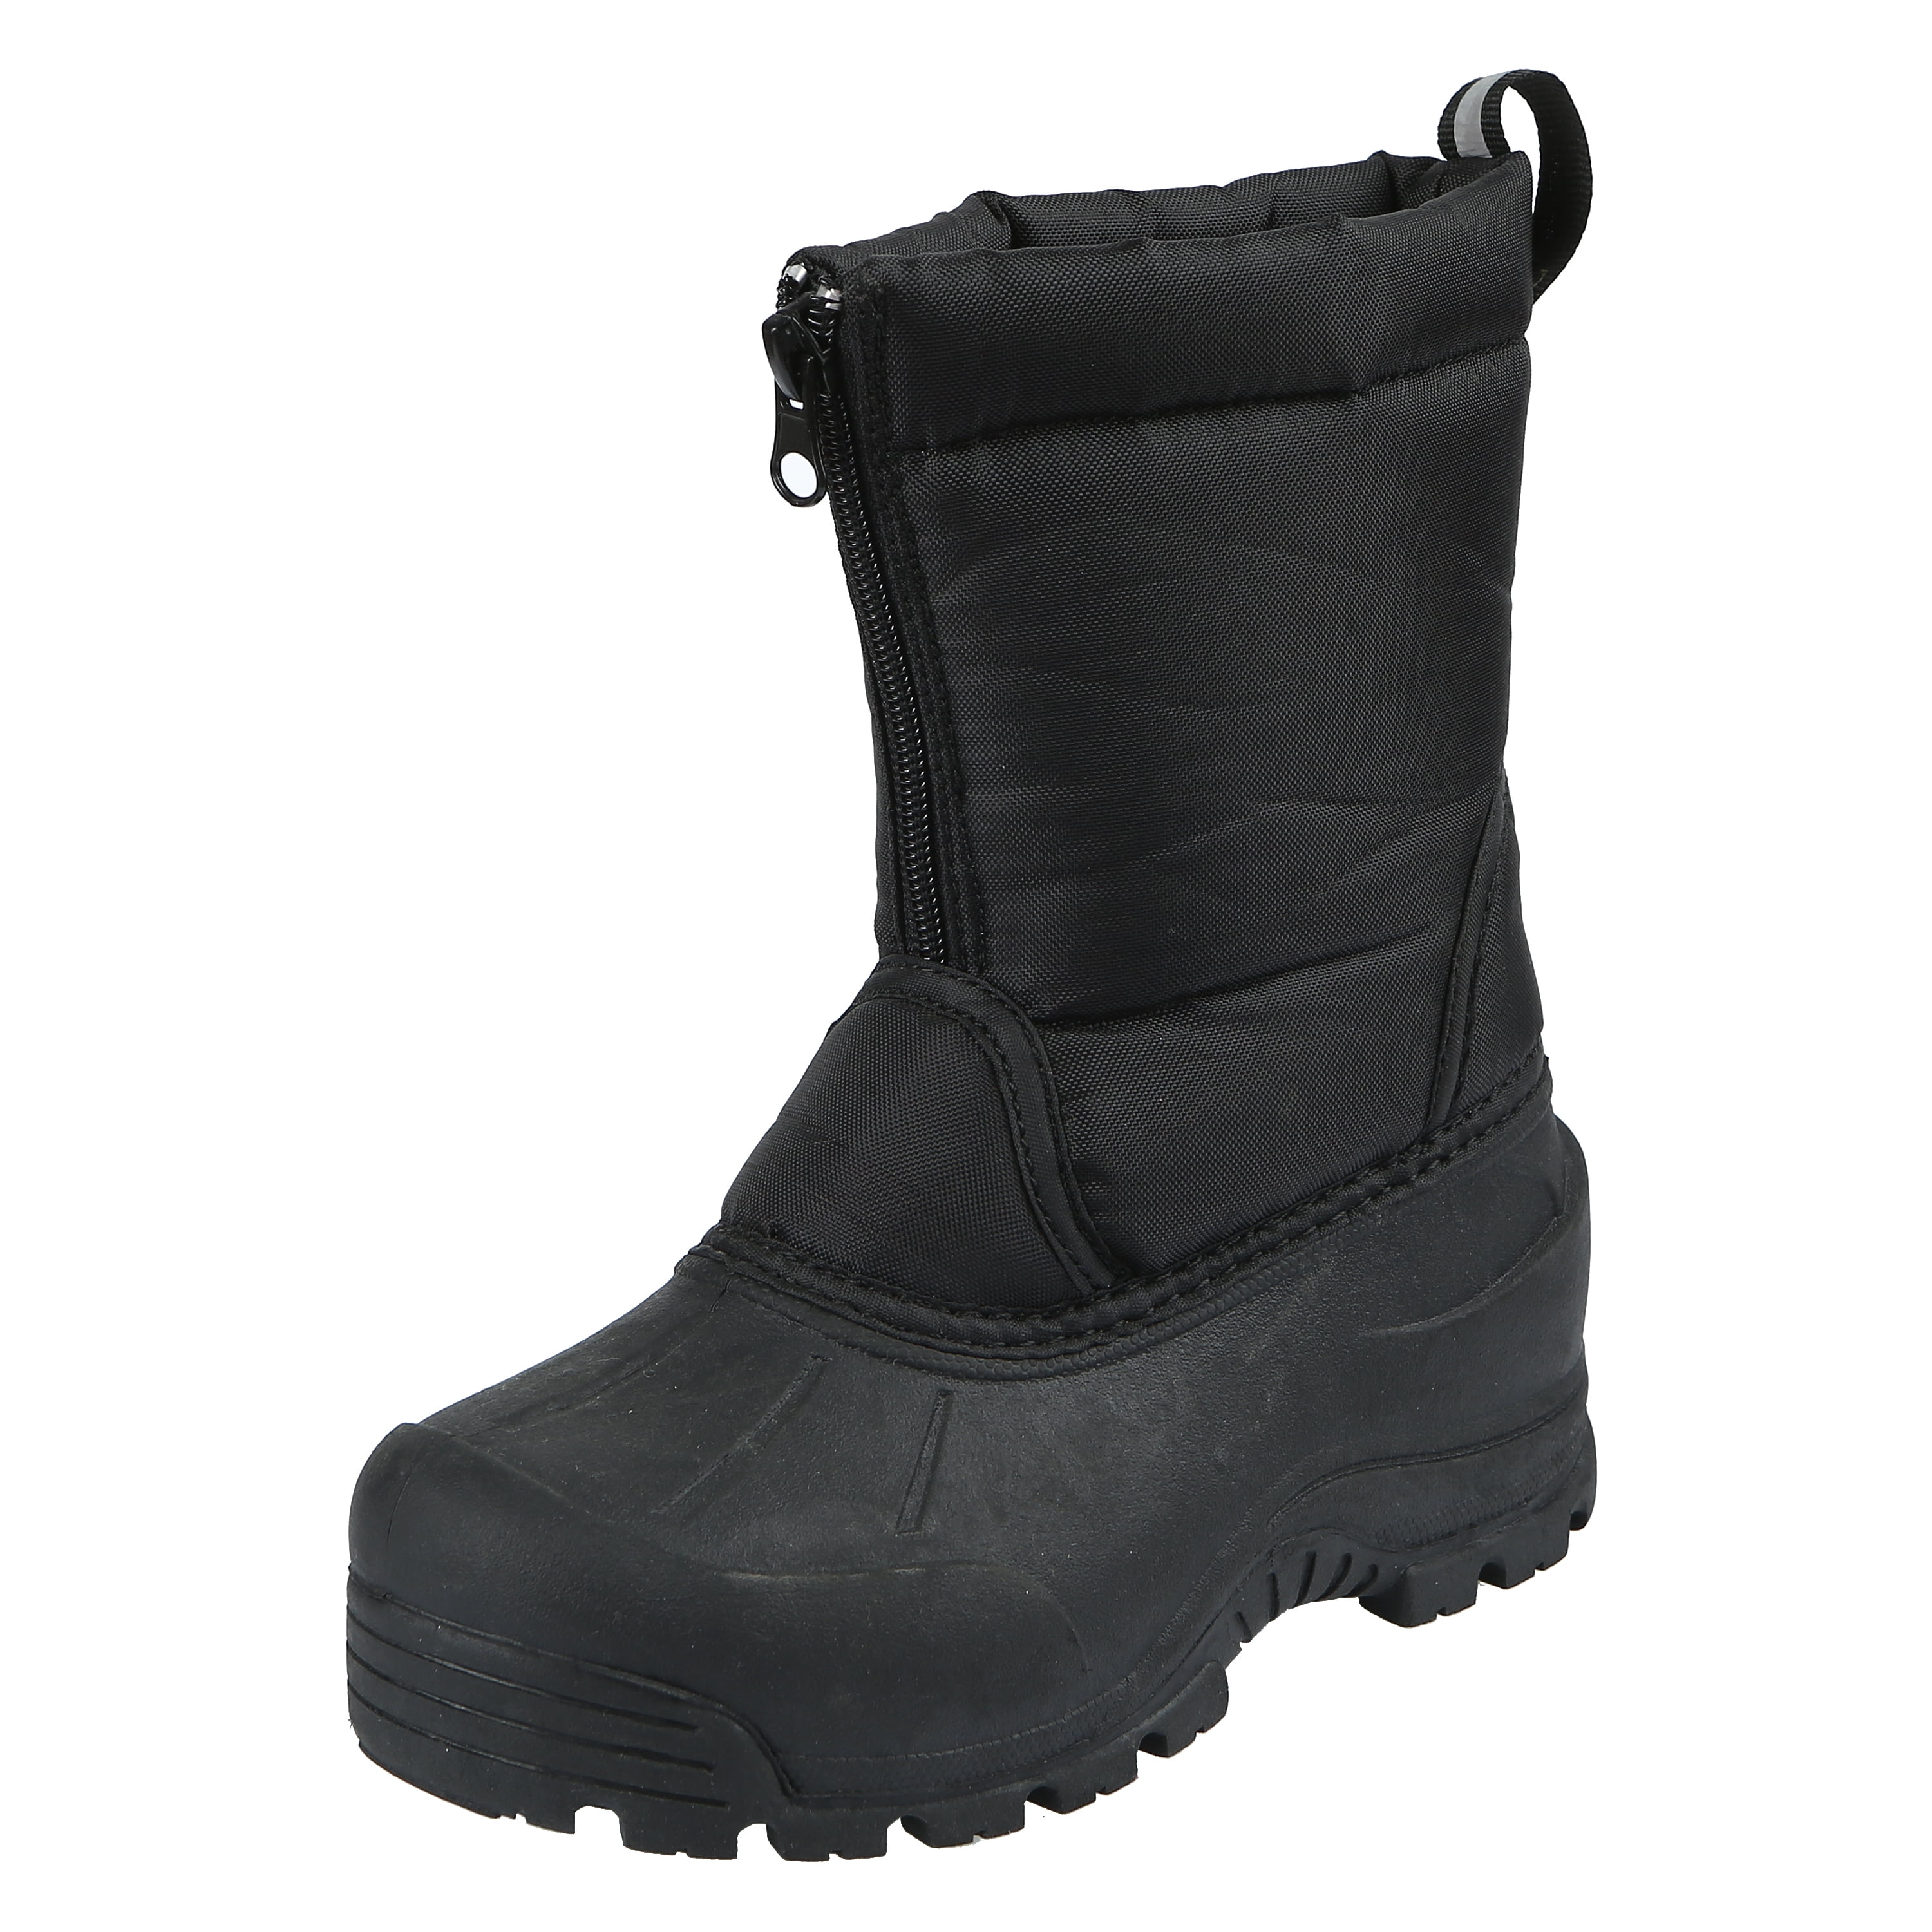 Northside Kids Icicle Waterproof Insulated Winter Snow Boot Toddler ...